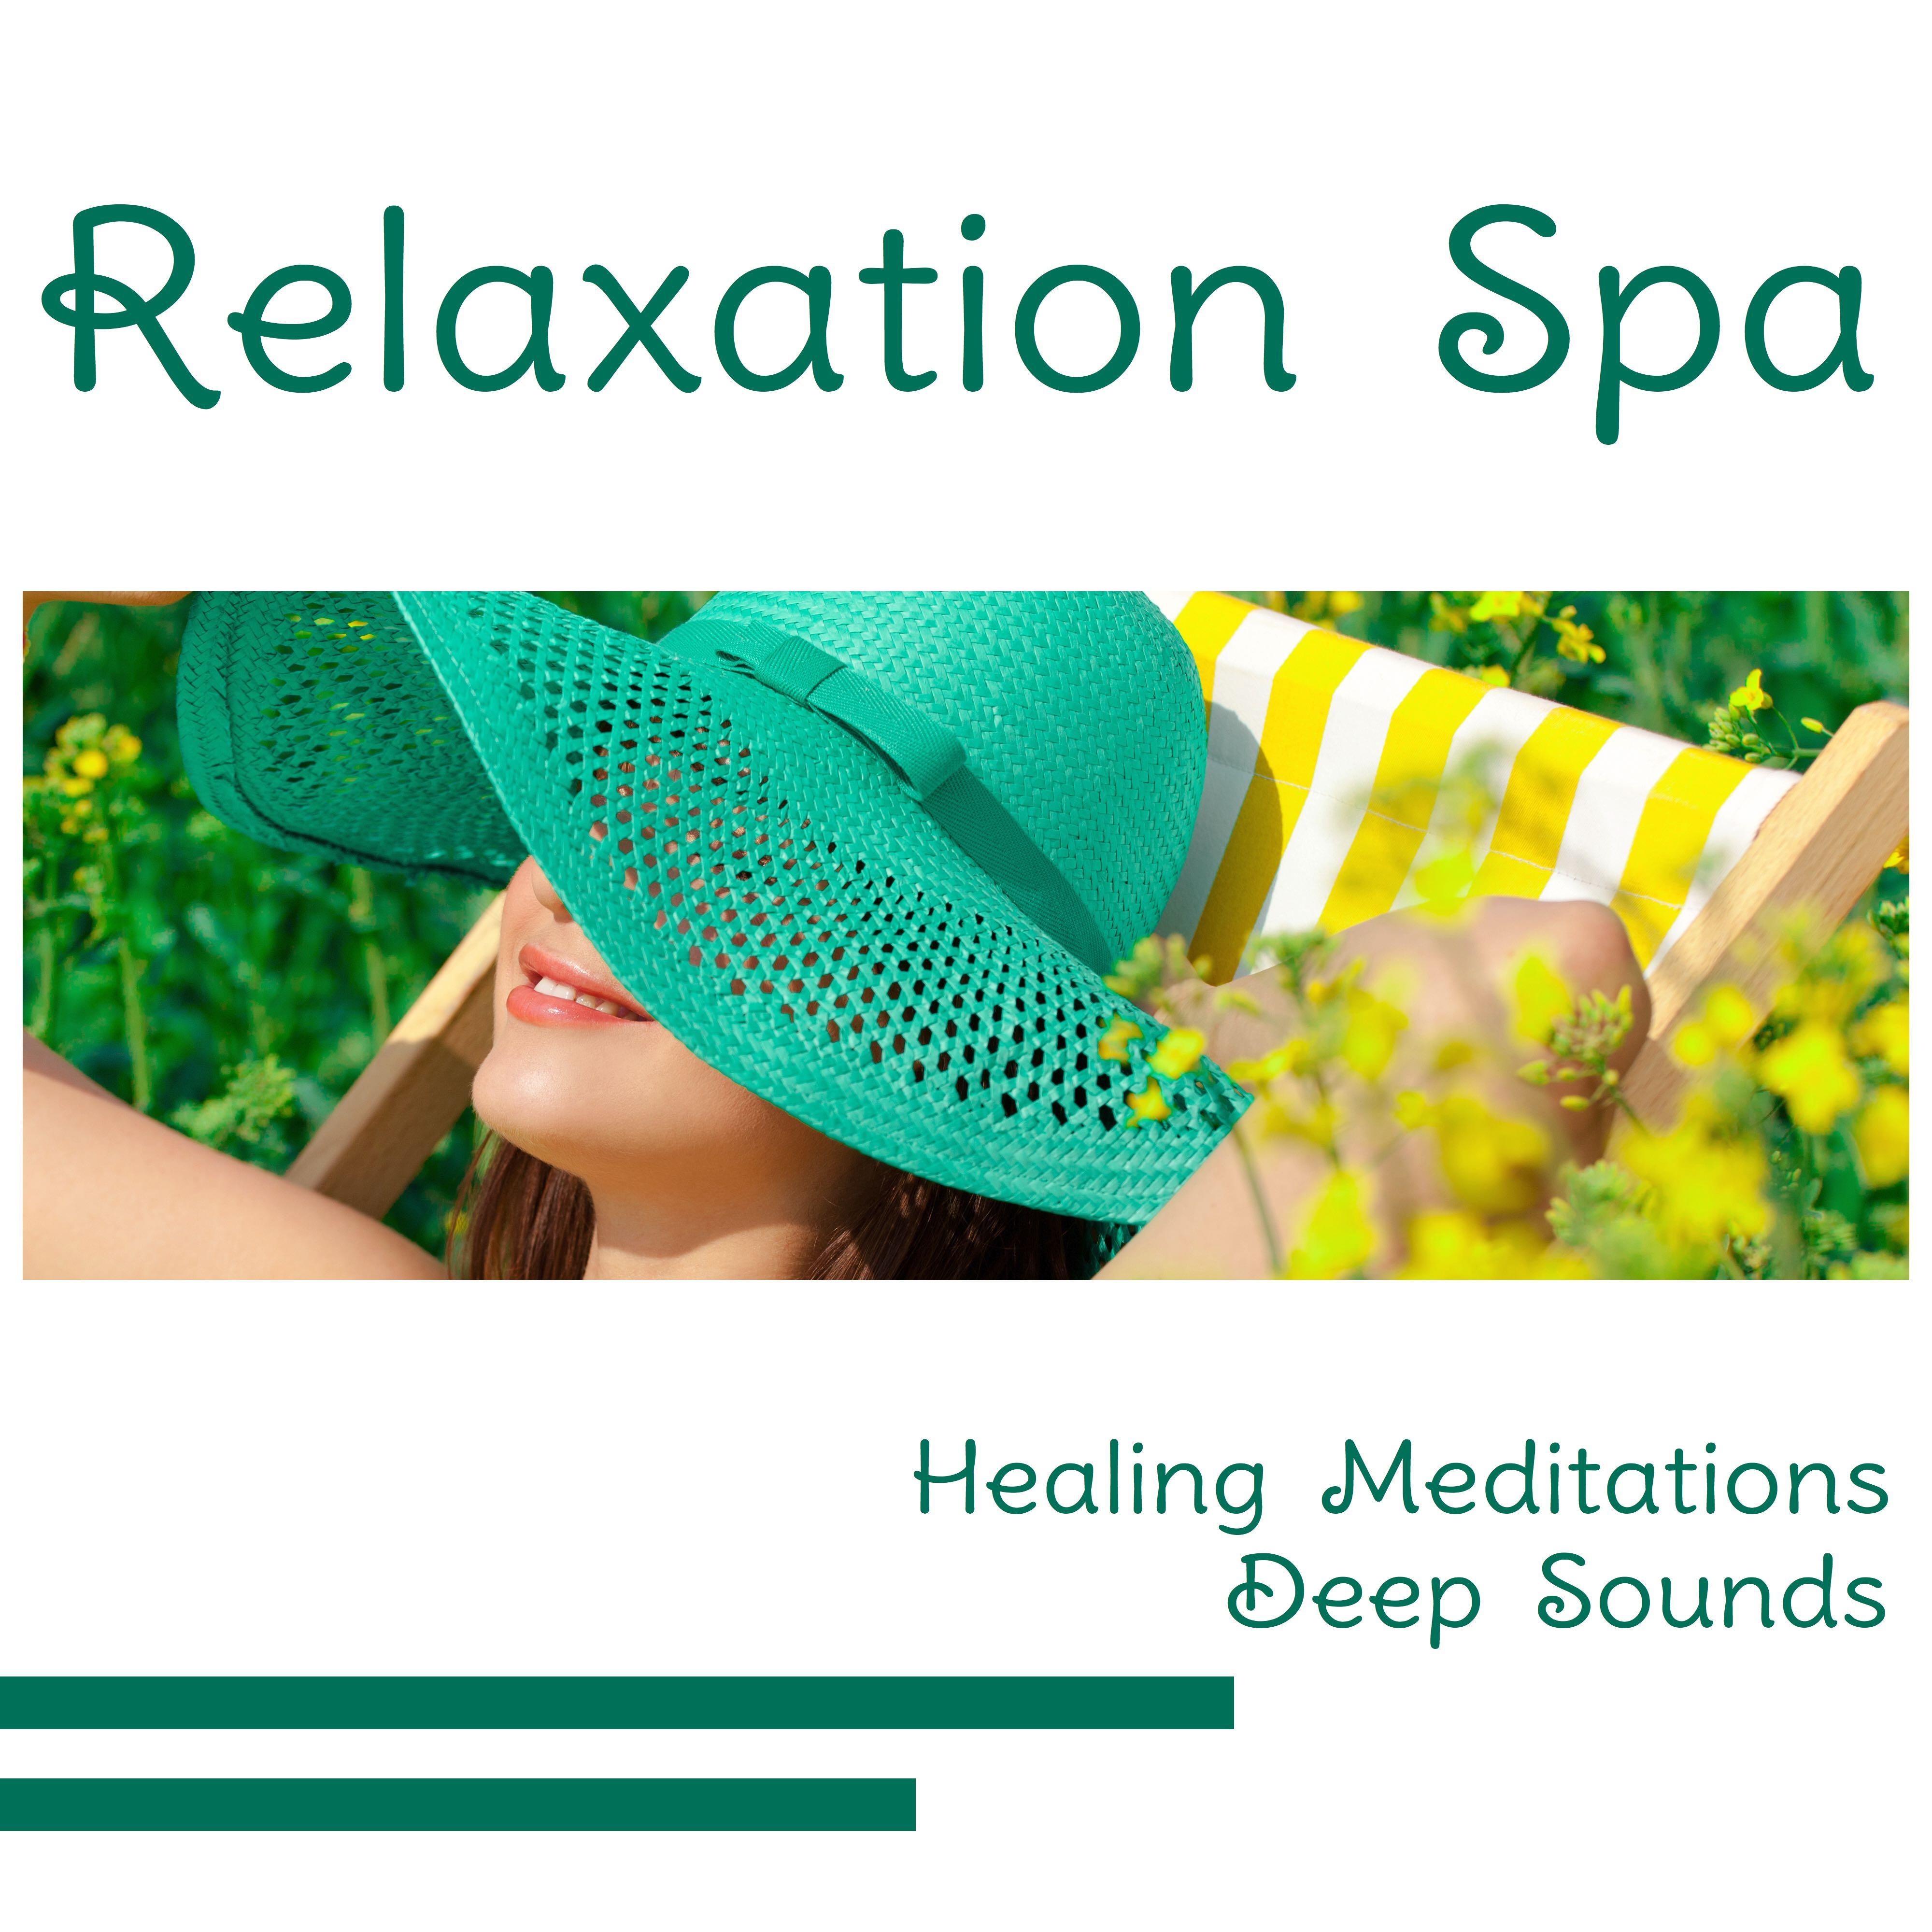 Relaxation Spa – Healing Meditations and Deep Sounds for Chakra Massage, Reiki, Yoga with White Noise